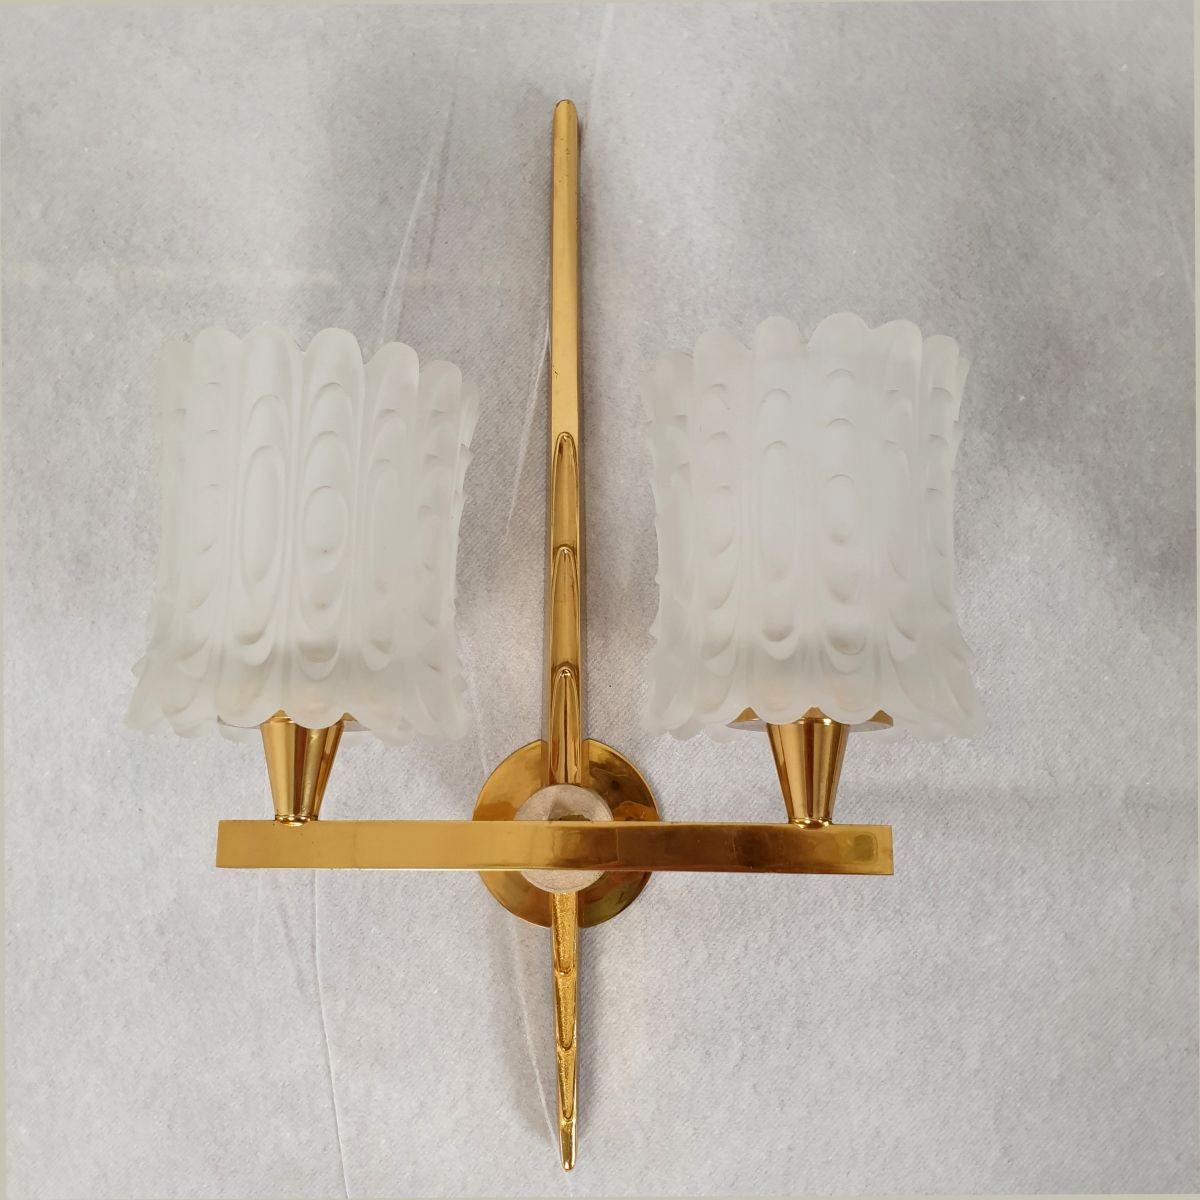 Pair of Mid Century wall sconces, France circa 1940s.
The elegant sconces are made of cast brass and frosted glass.
The style is Mid Century Modern with an Art Deco touch.
Each wall light has 2 lights and the pair is professionally rewired for the